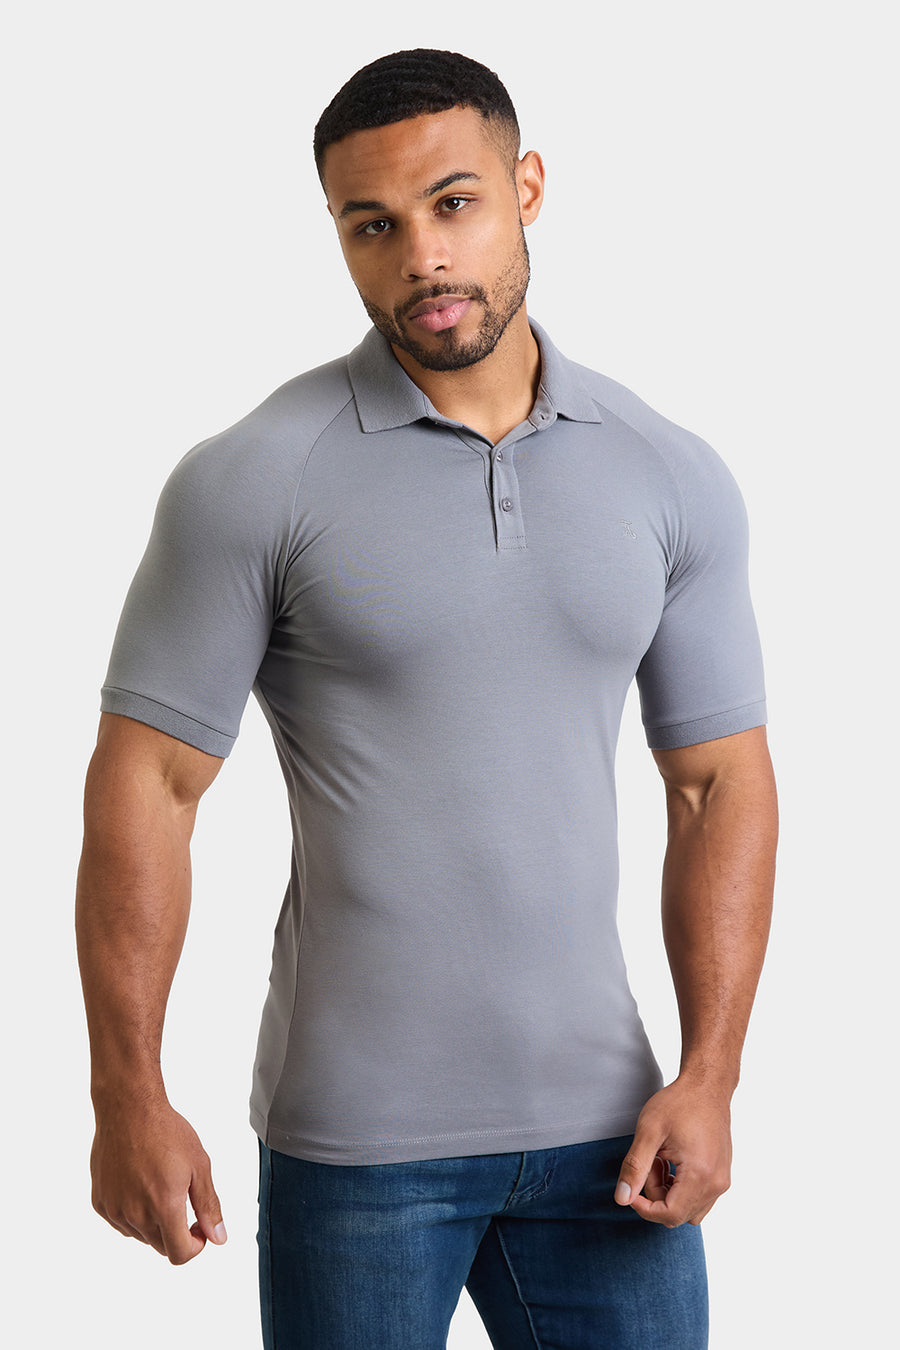 Athletic Fit Polo in Lead Grey - TAILORED ATHLETE - USA